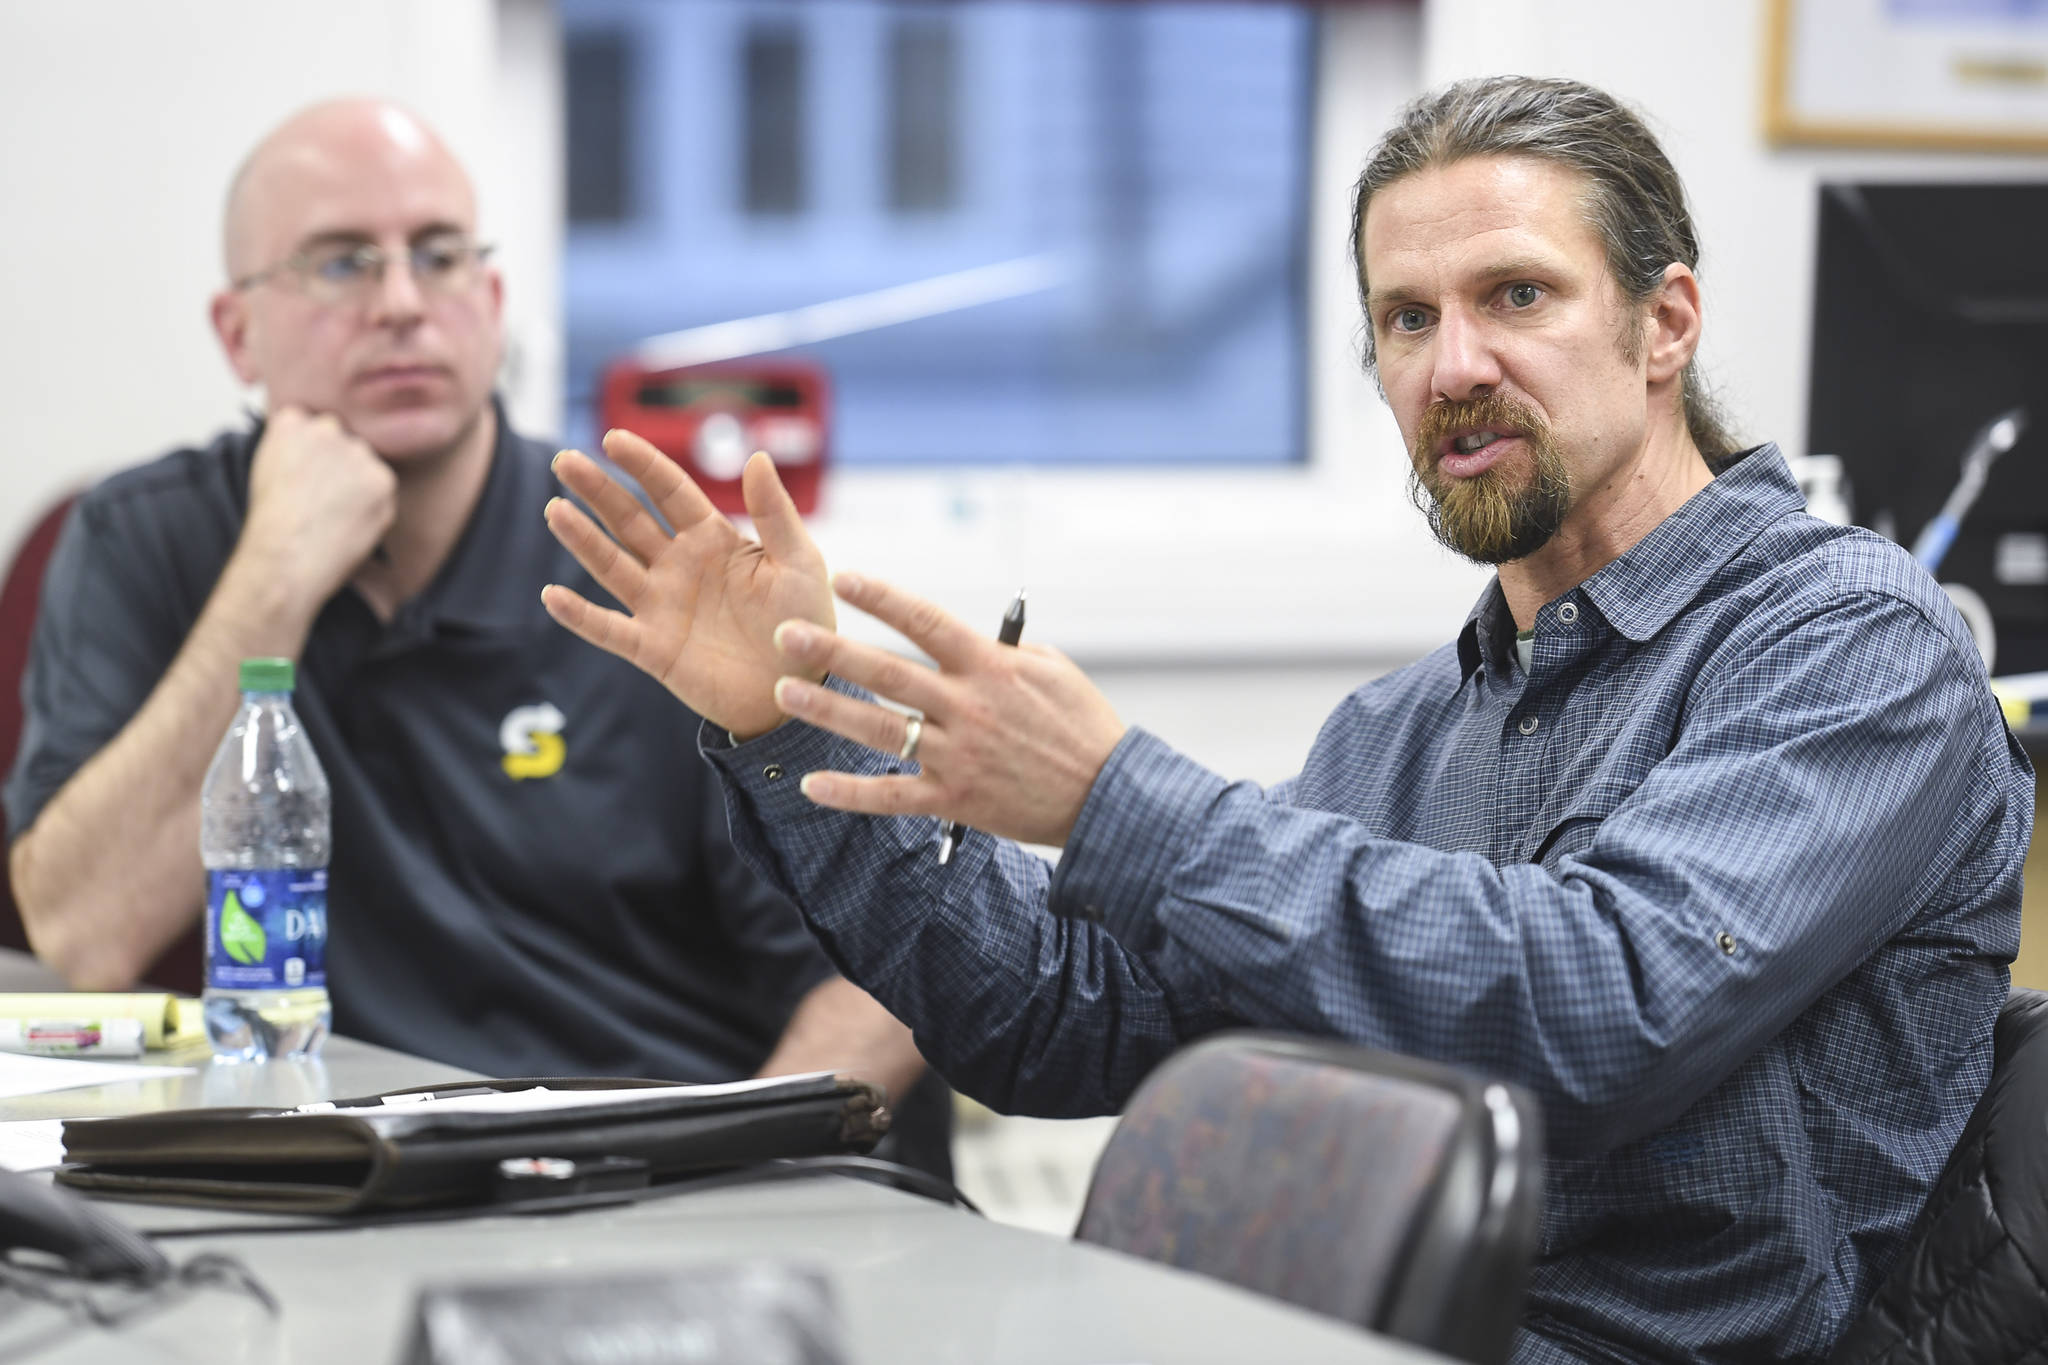 Eaglecrest Ski Area General Manager Dave Scanlan, right, speaks during a task force meeting at City Hall looking into summer activities at the city-owned ski resort on Thursday, Dec. 19, 2019. (Michael Penn | Juneau Empire)